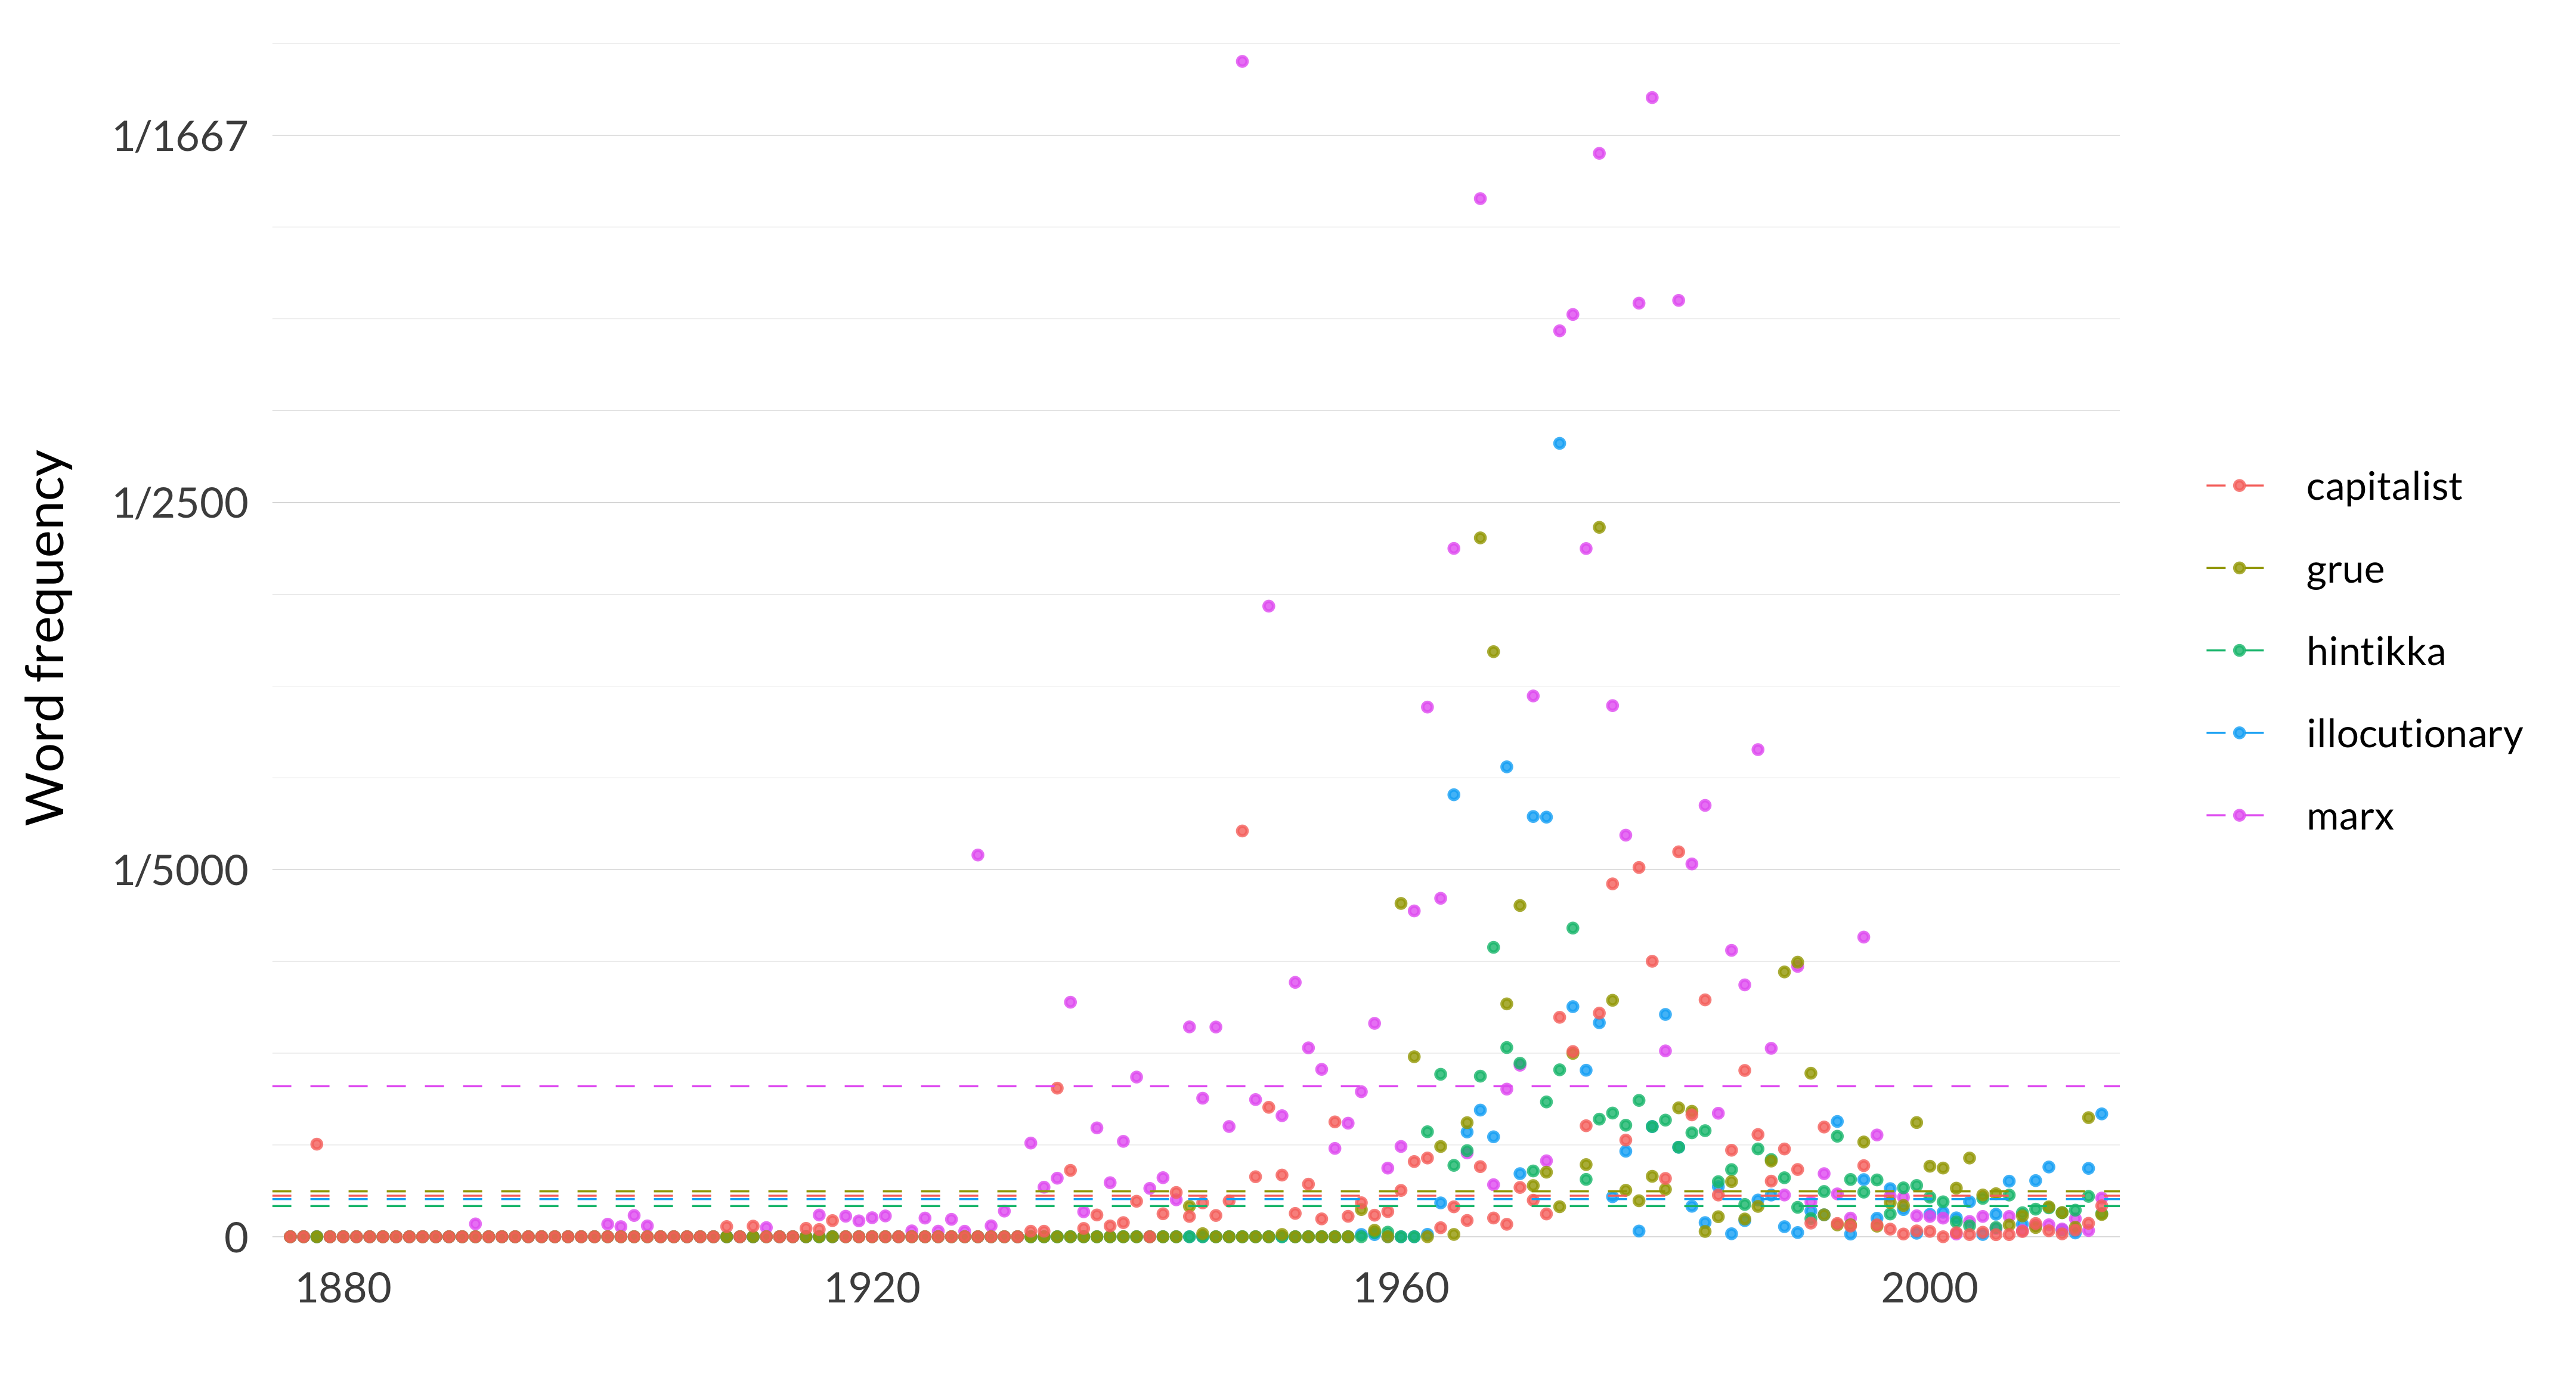 A scatterplot showing the frequency of the words illocutionary, marx, hintikka, grue, capitalist. The word illocutionary appears, on average across the years, 20 times per million words, and in the median year, it appears 0 times per million words. Its most frequent occurrence is in 1972 when it appears 432 times per million words, and its least frequent occurrence is in 1876 when it appears 0 times per million words. The word marx appears, on average across the years, 82 times per million words, and in the median year, it appears 13 times per million words. Its most frequent occurrence is in 1948 when it appears 640 times per million words, and its least frequent occurrence is in 1876 when it appears 0 times per million words. The word hintikka appears, on average across the years, 17 times per million words, and in the median year, it appears 0 times per million words. Its most frequent occurrence is in 1973 when it appears 168 times per million words, and its least frequent occurrence is in 1876 when it appears 0 times per million words. The word grue appears, on average across the years, 25 times per million words, and in the median year, it appears 0 times per million words. Its most frequent occurrence is in 1975 when it appears 386 times per million words, and its least frequent occurrence is in 1876 when it appears 0 times per million words. The word capitalist appears, on average across the years, 22 times per million words, and in the median year, it appears 5 times per million words. Its most frequent occurrence is in 1948 when it appears 221 times per million words, and its least frequent occurrence is in 1876 when it appears 0 times per million words. 